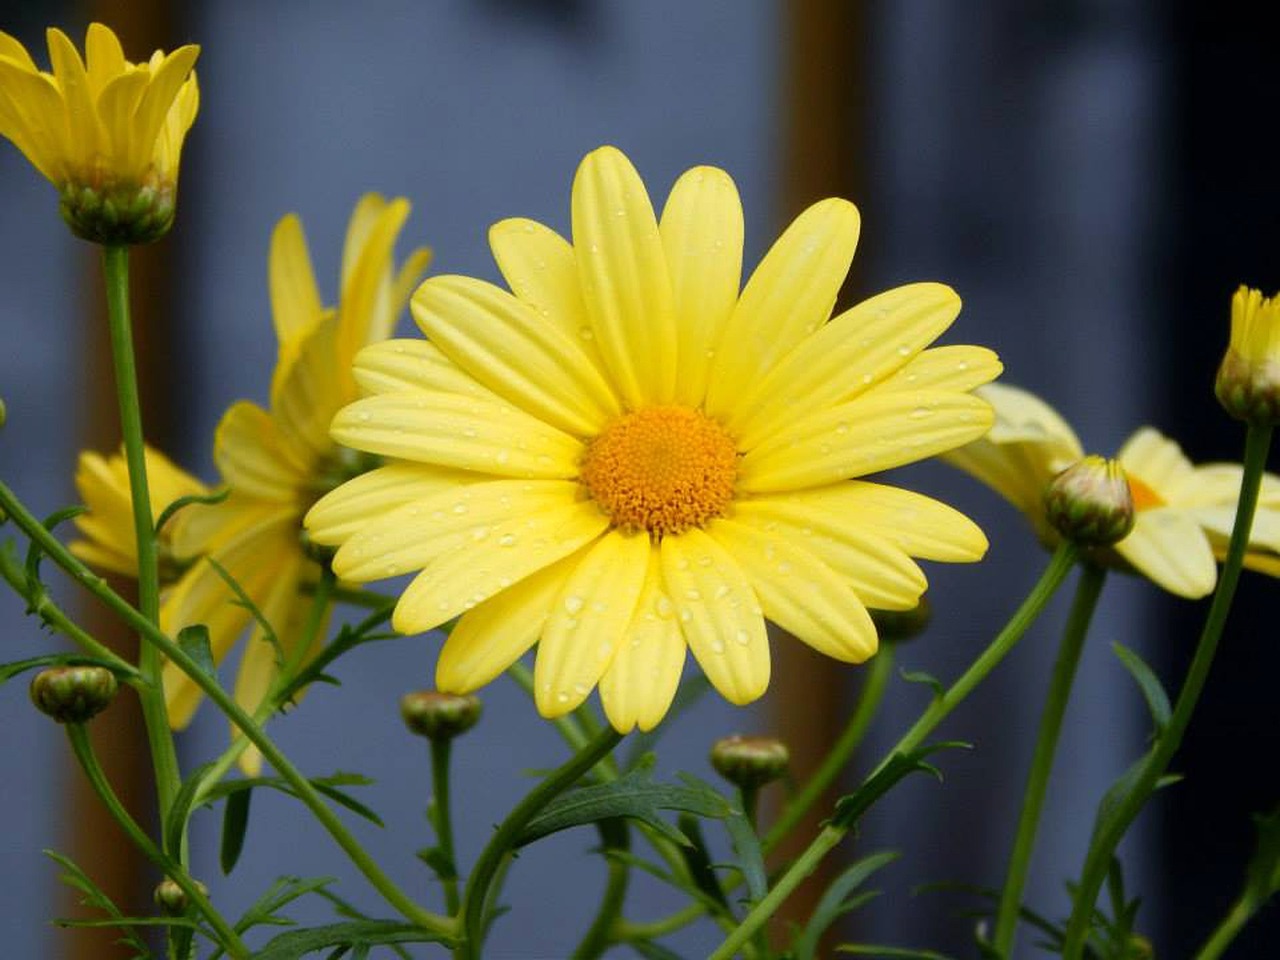 daisy,flower,spring,summer,yellow,nature,plant,floral,blossom,natural,bloom...